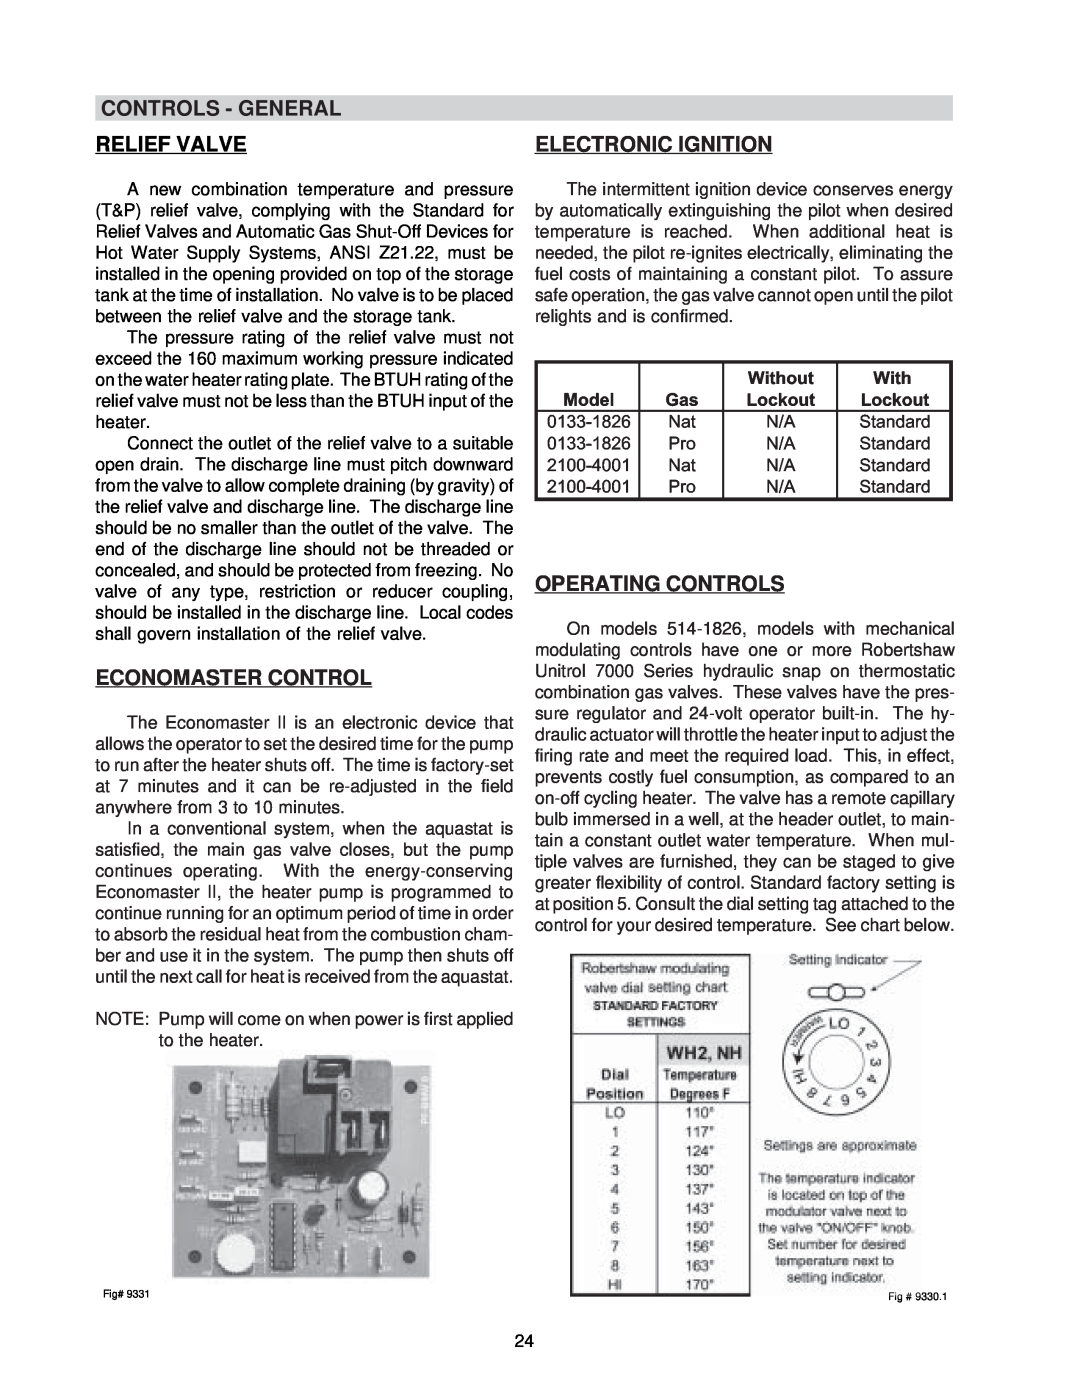 Raypak NH, 0133-4001 WH Controls - General, Relief Valve, Electronic Ignition, Economaster Control, Operating Controls 